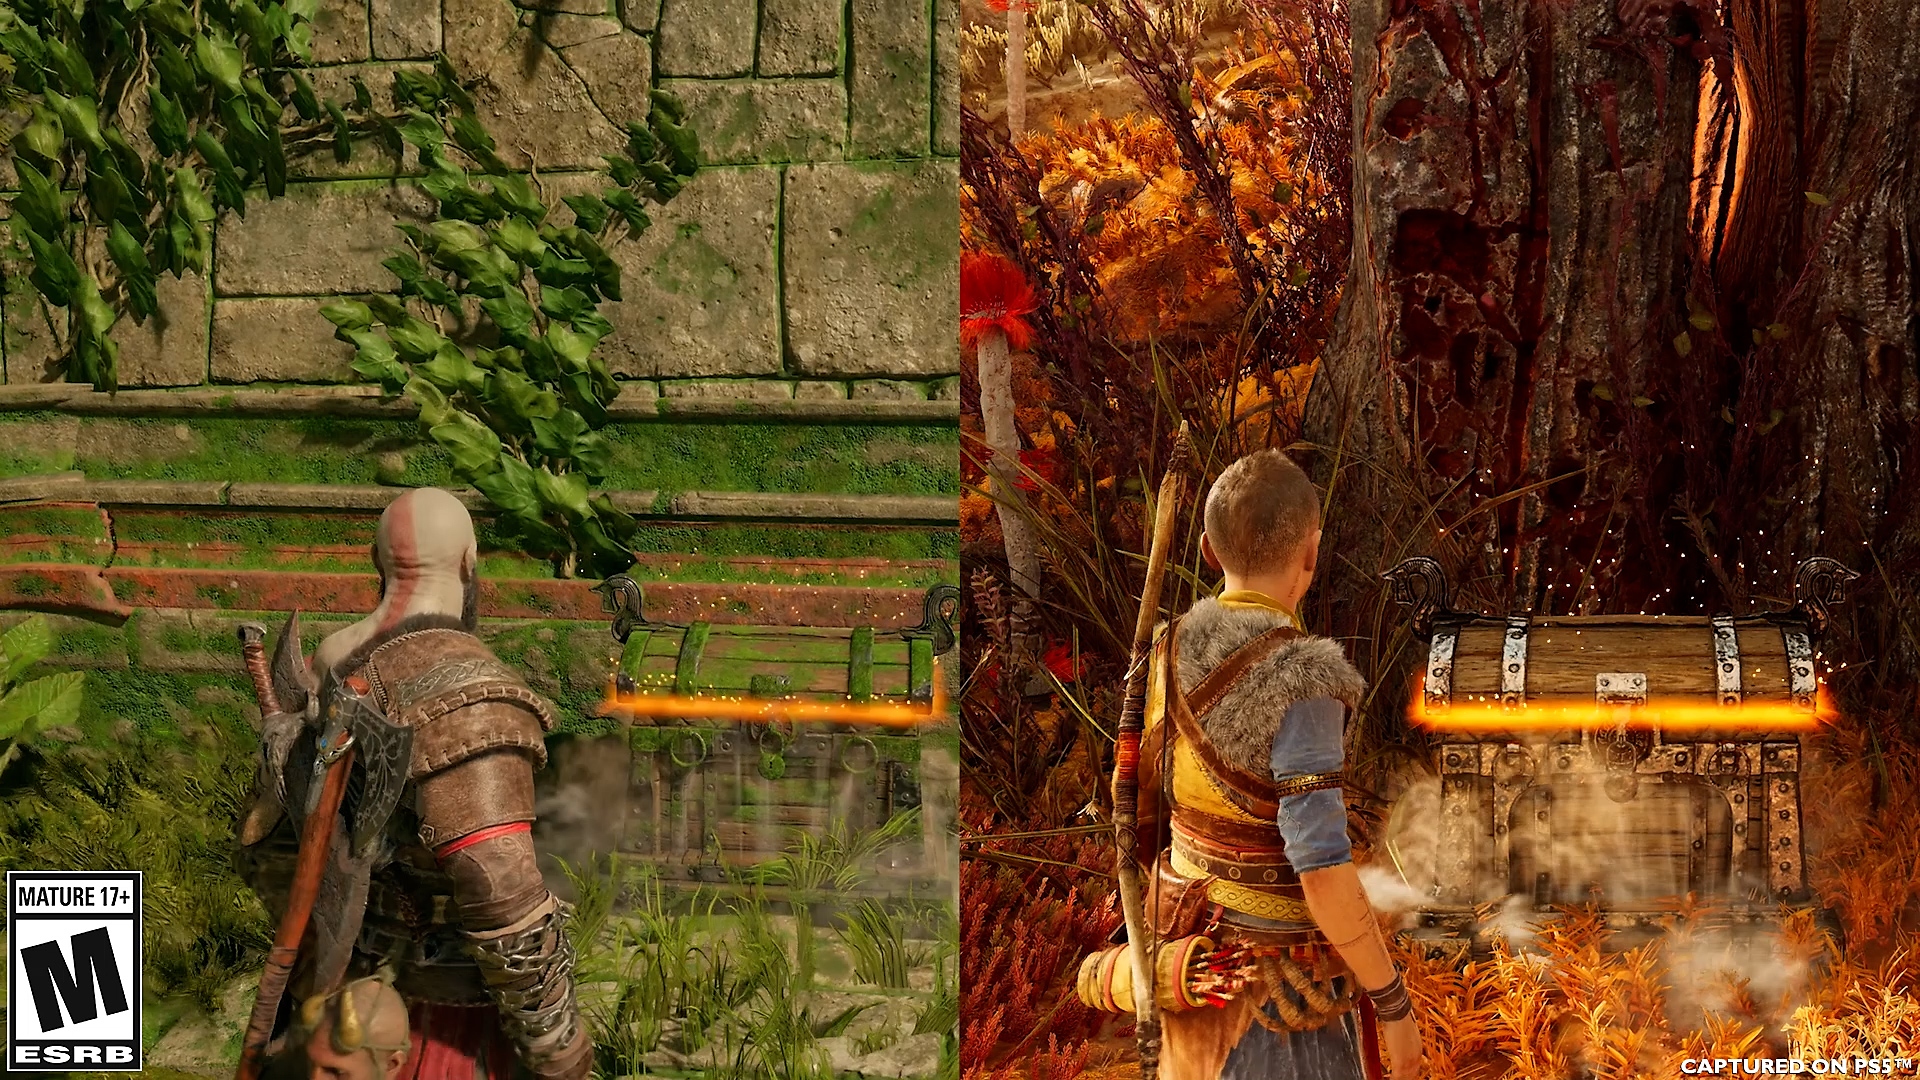 Animated comparison of Atreus and Kratos opening a chest from God of War Ragnarök.